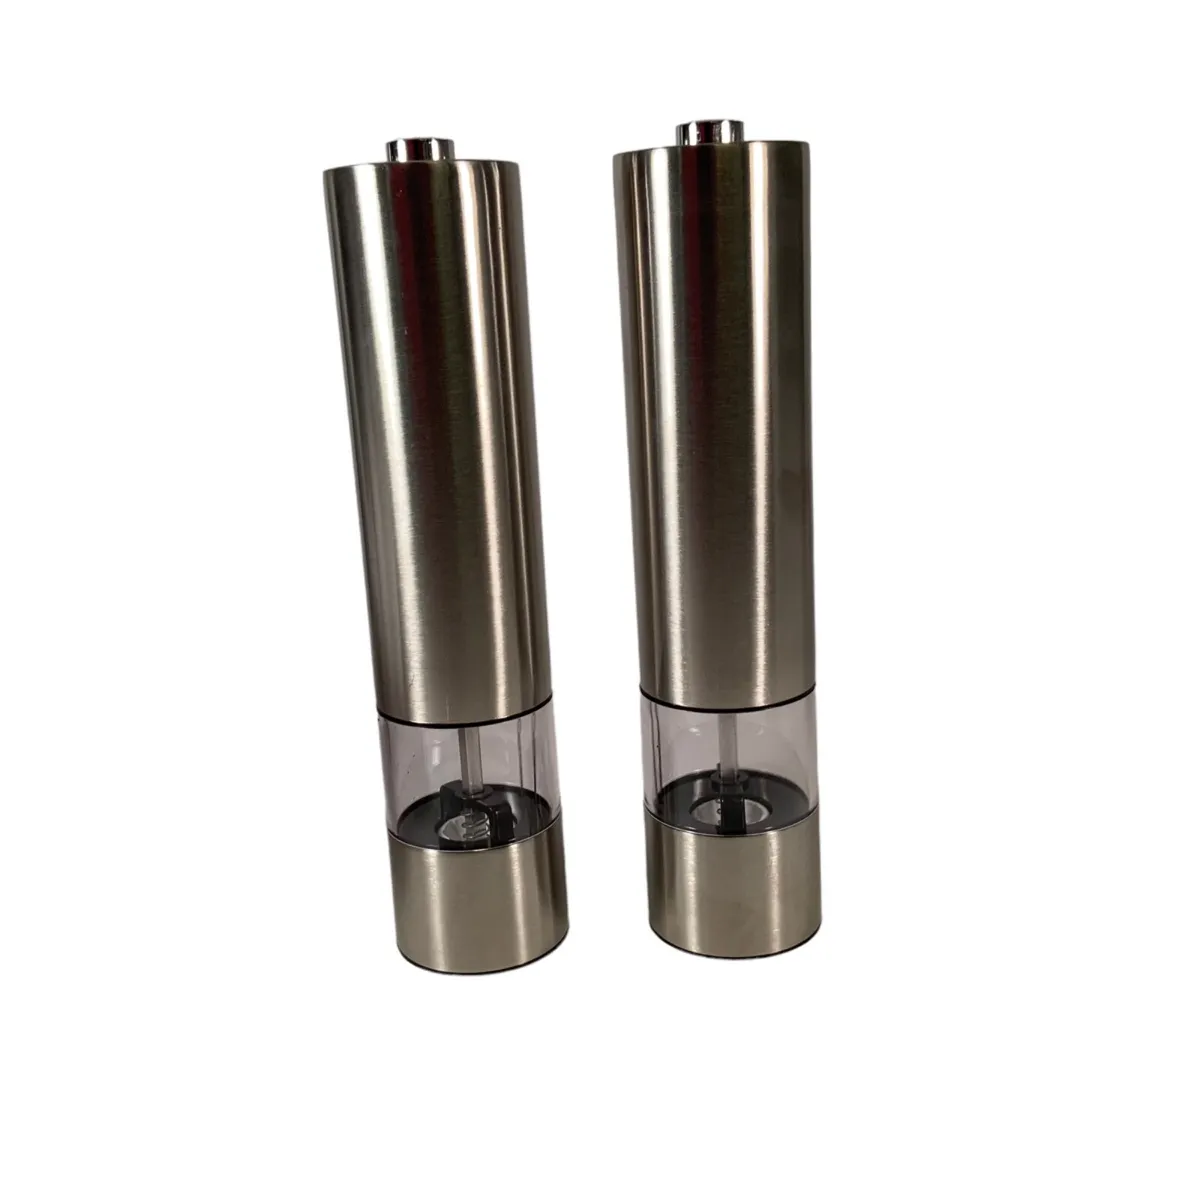 Salt & Pepper Mill Set Battery Powered Push Button with Built in